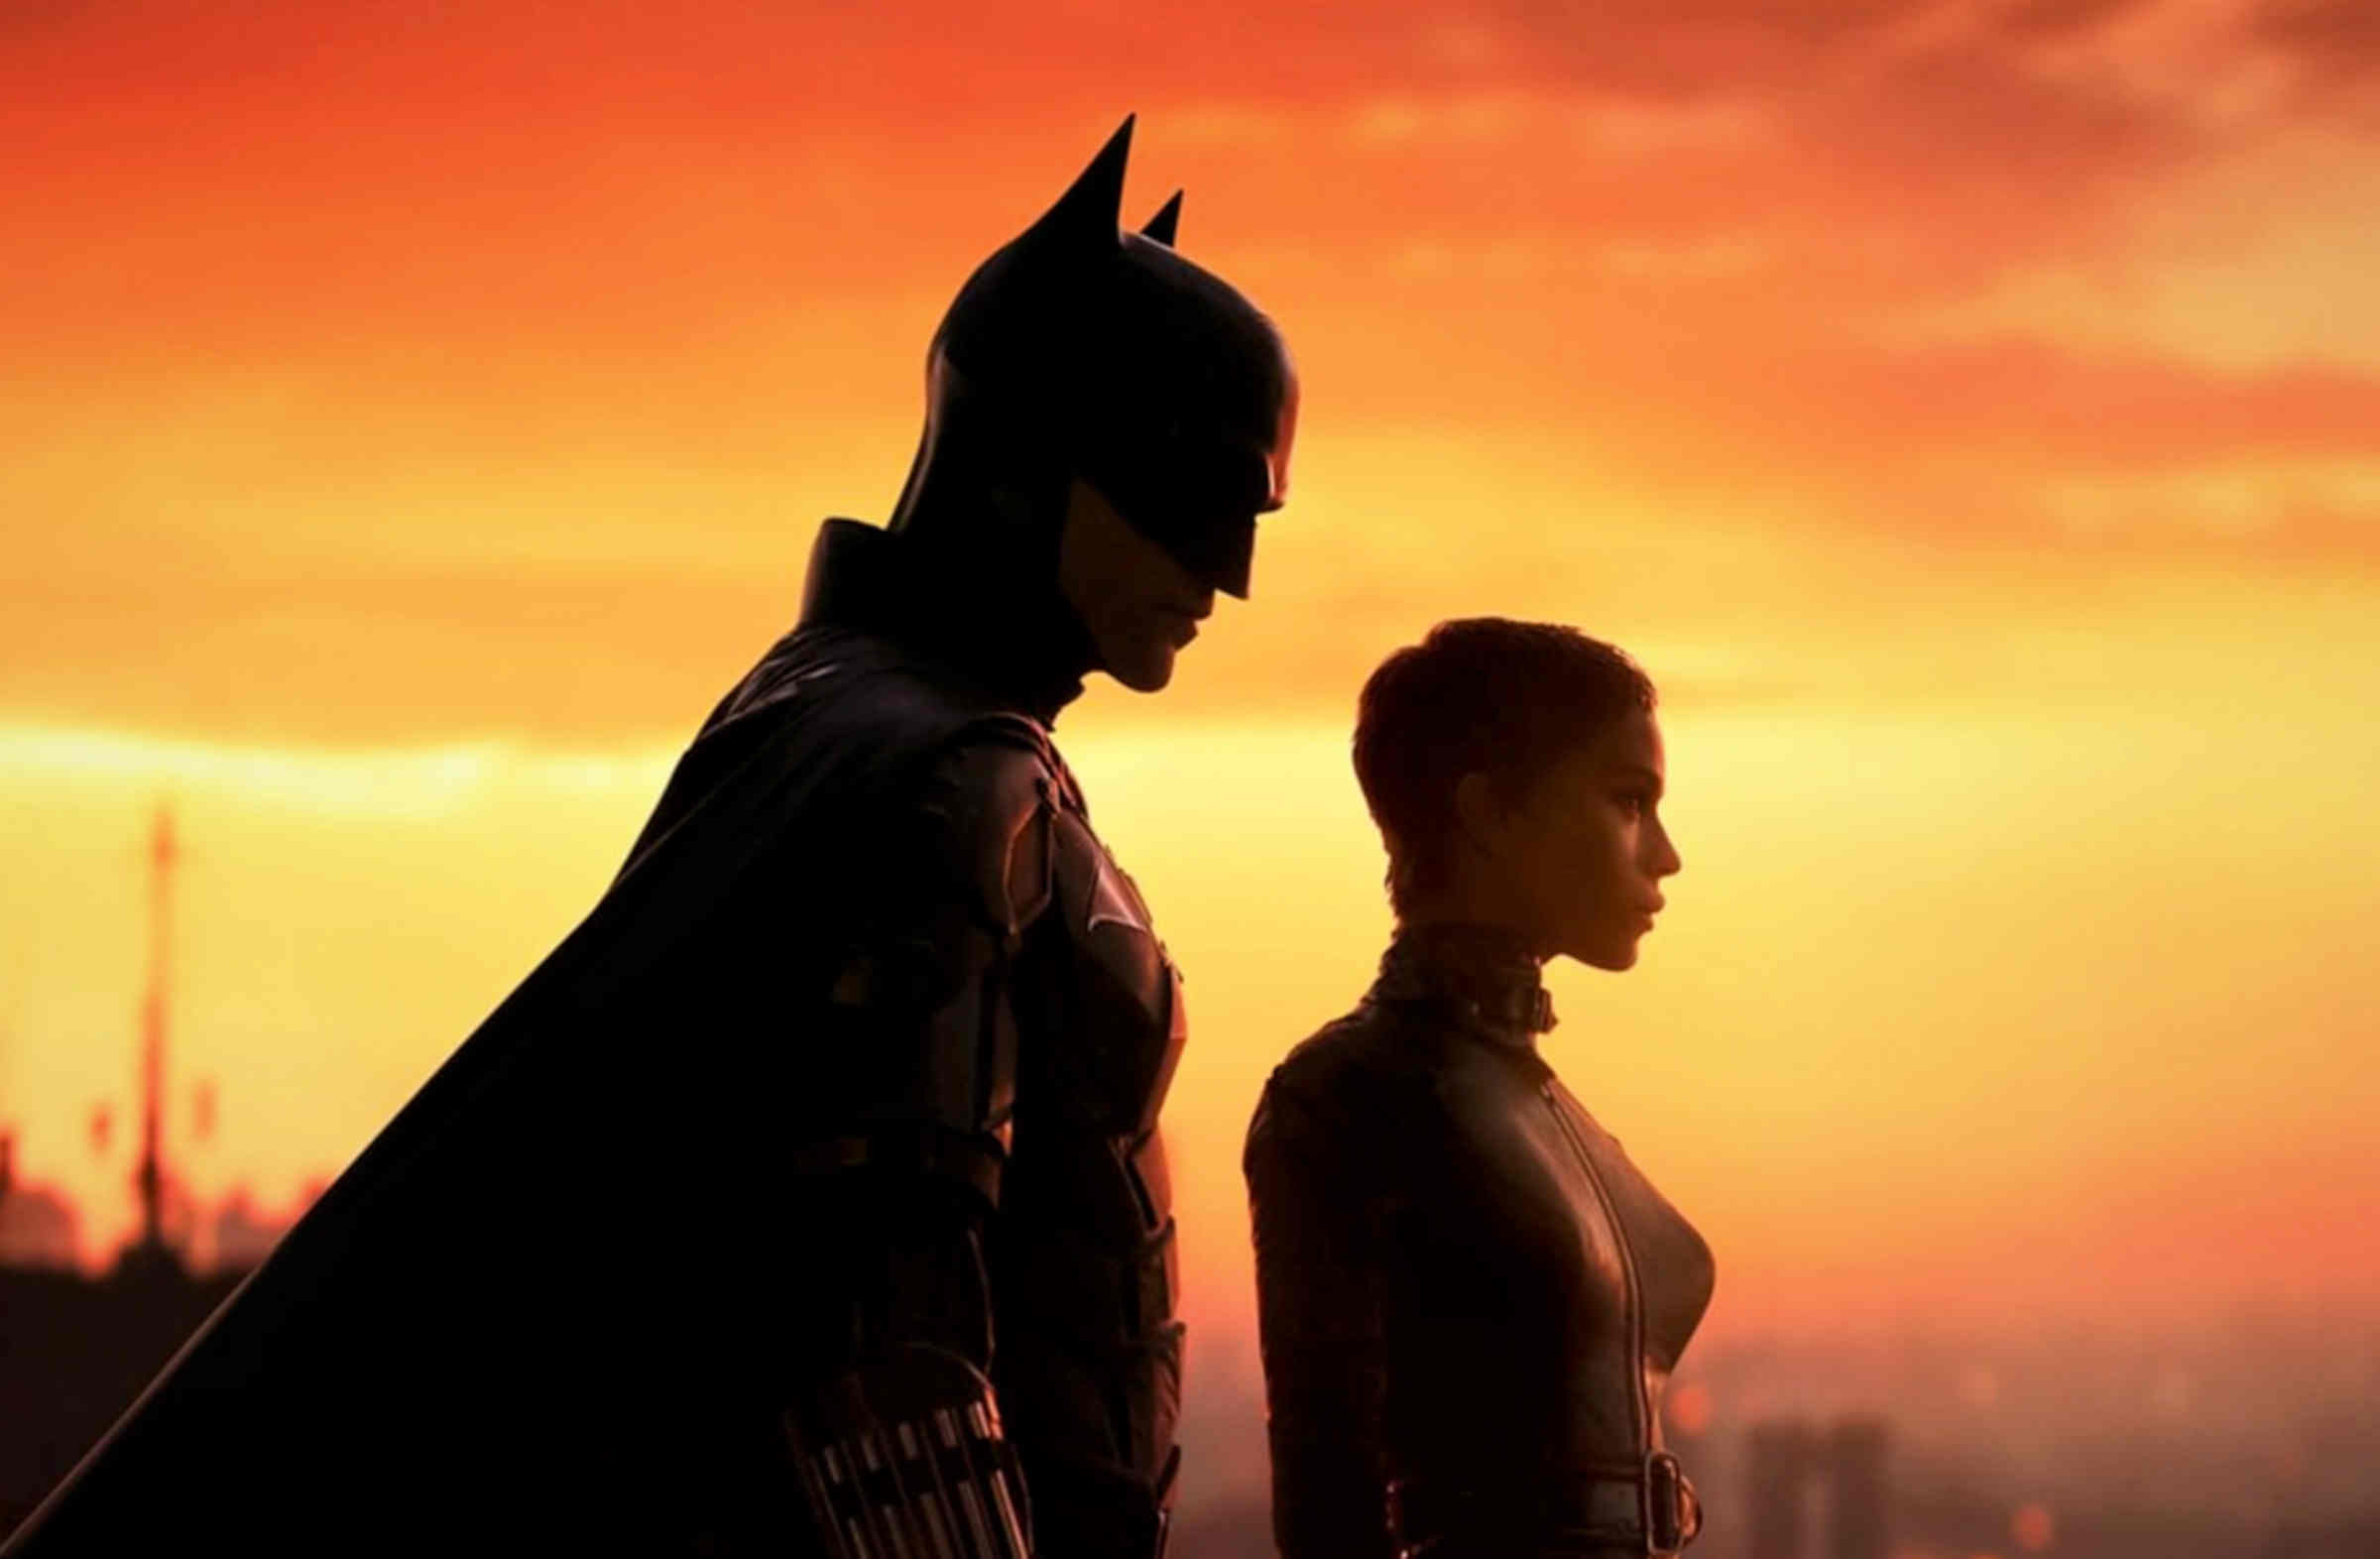 The Batman is finally here. Discover how to stream the brand new DC blockbuster movie online for free.